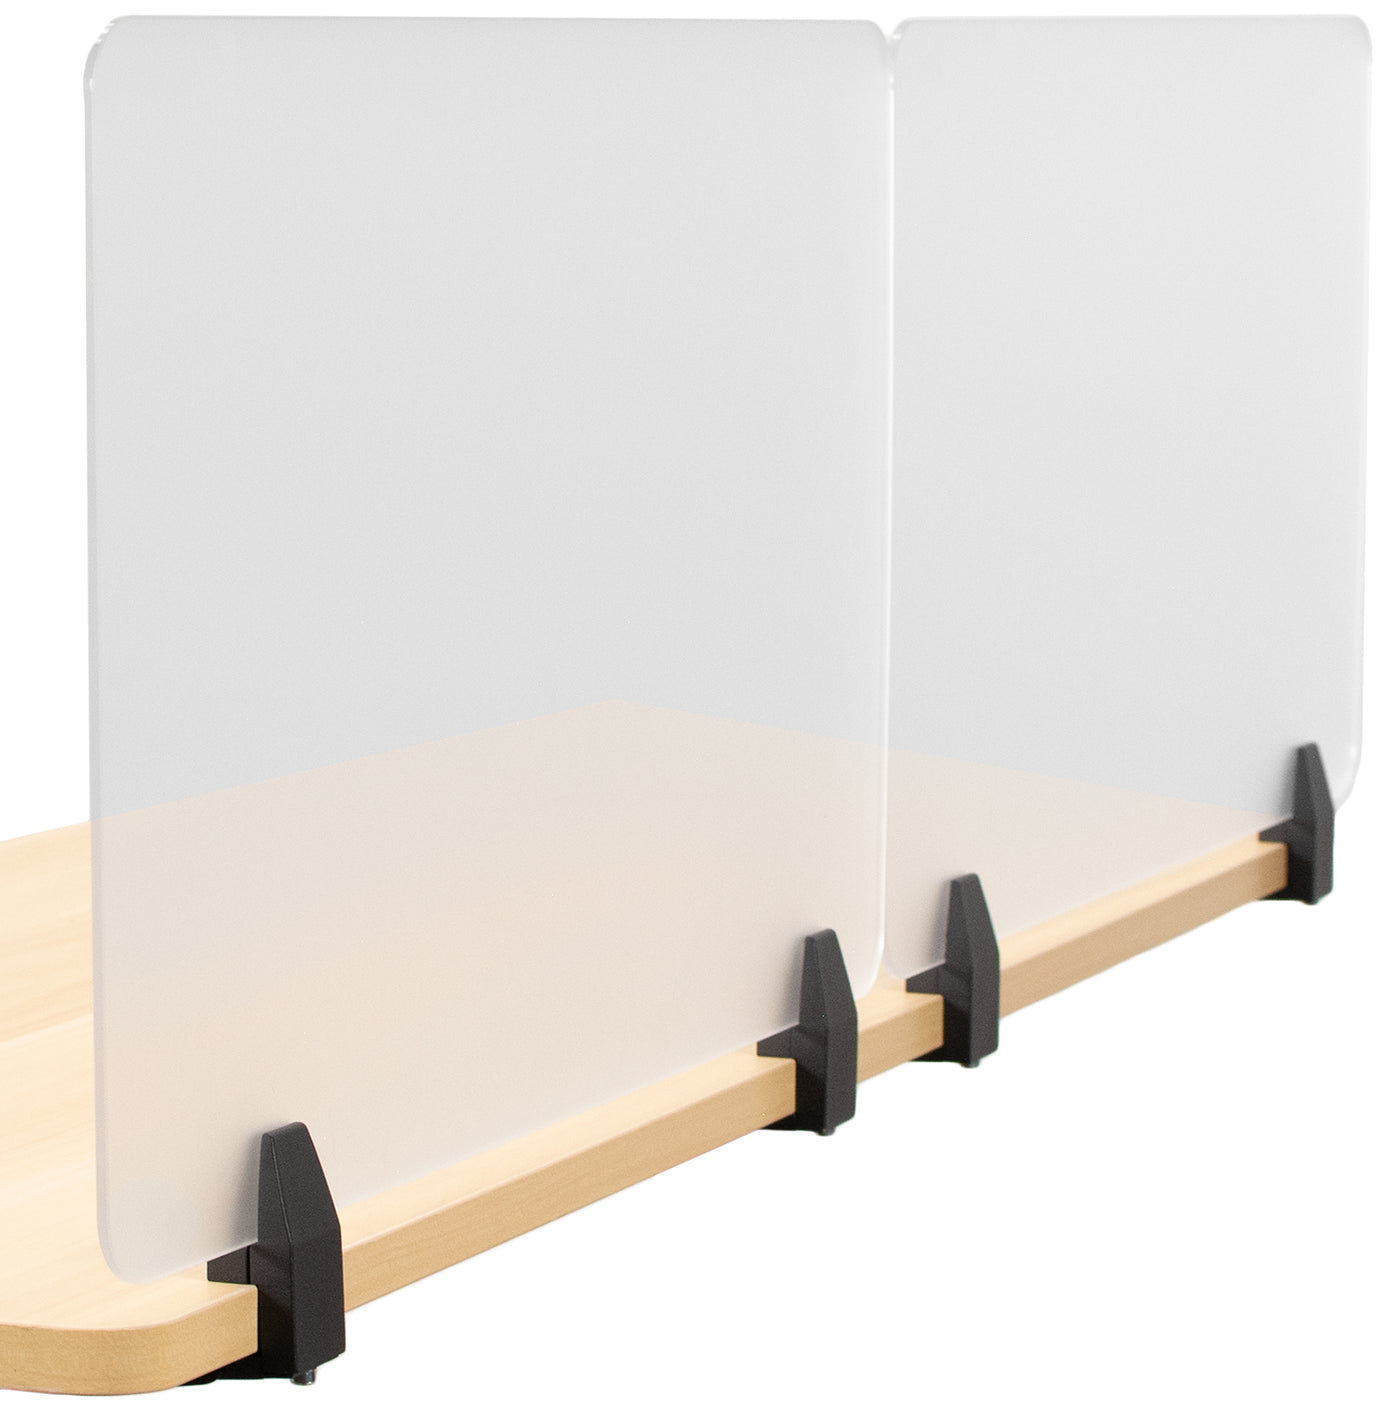 Frosted Clamp-on Desk Privacy Panels